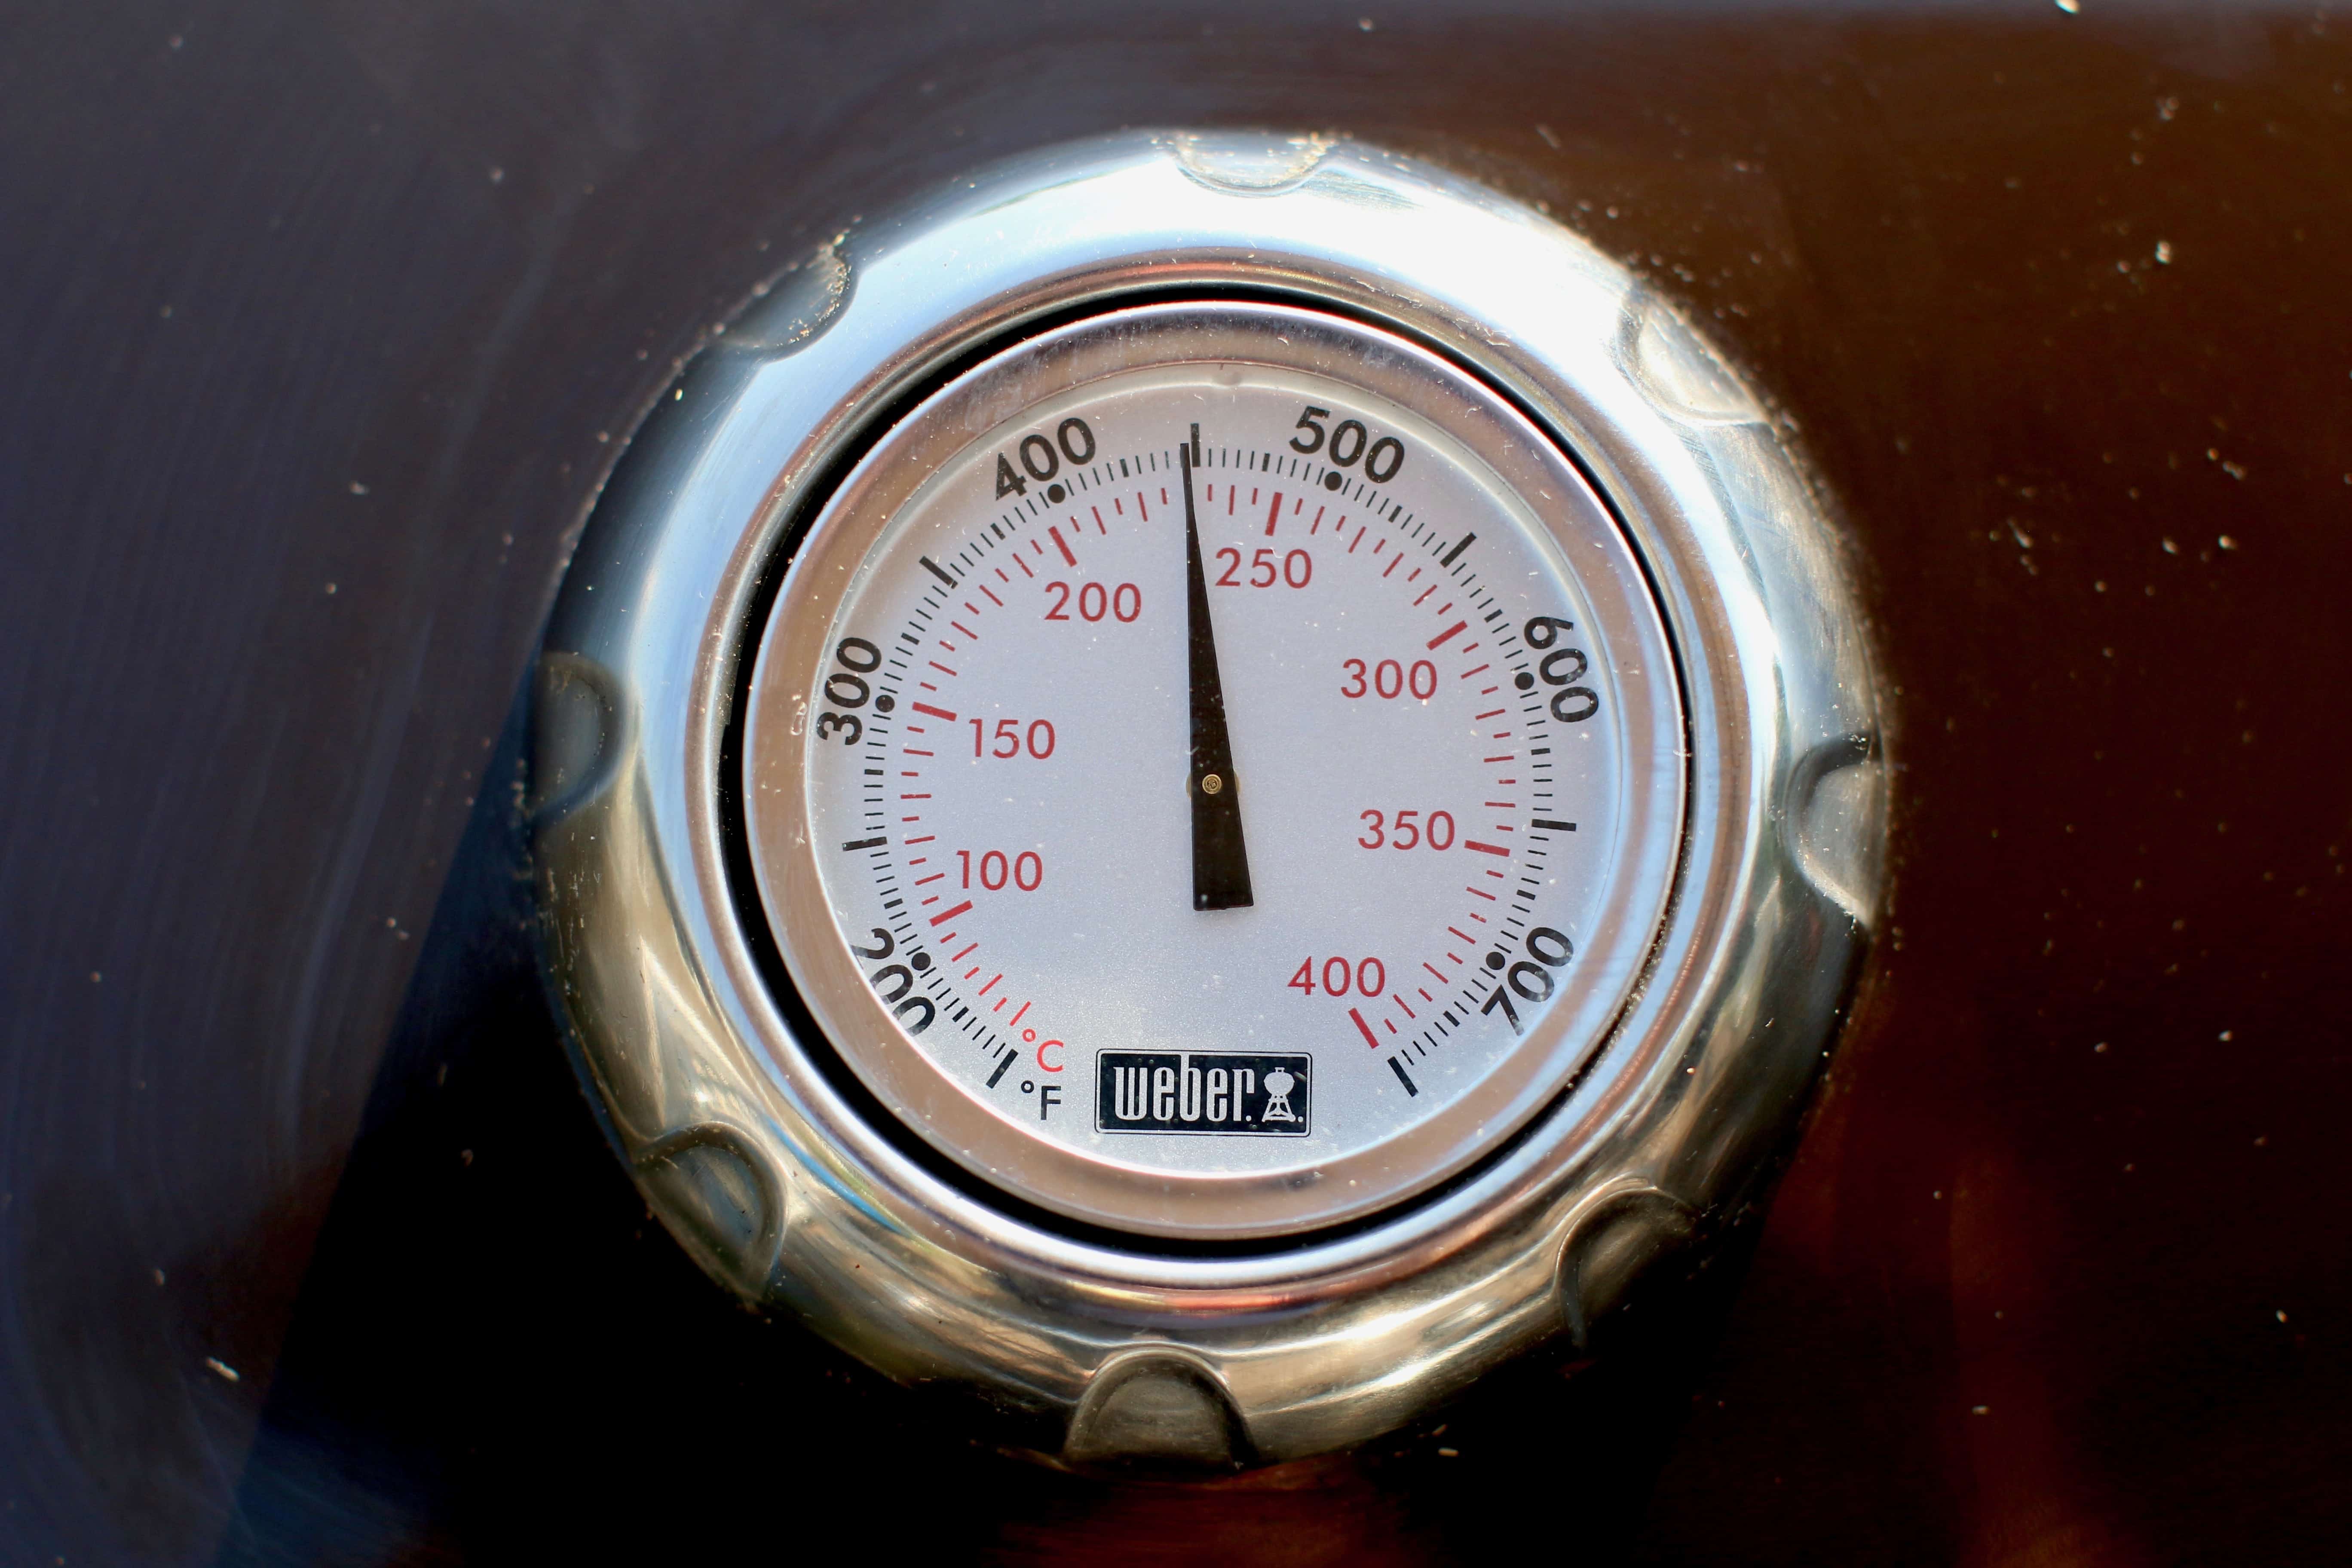 temperature gauge showing 450F on grill.